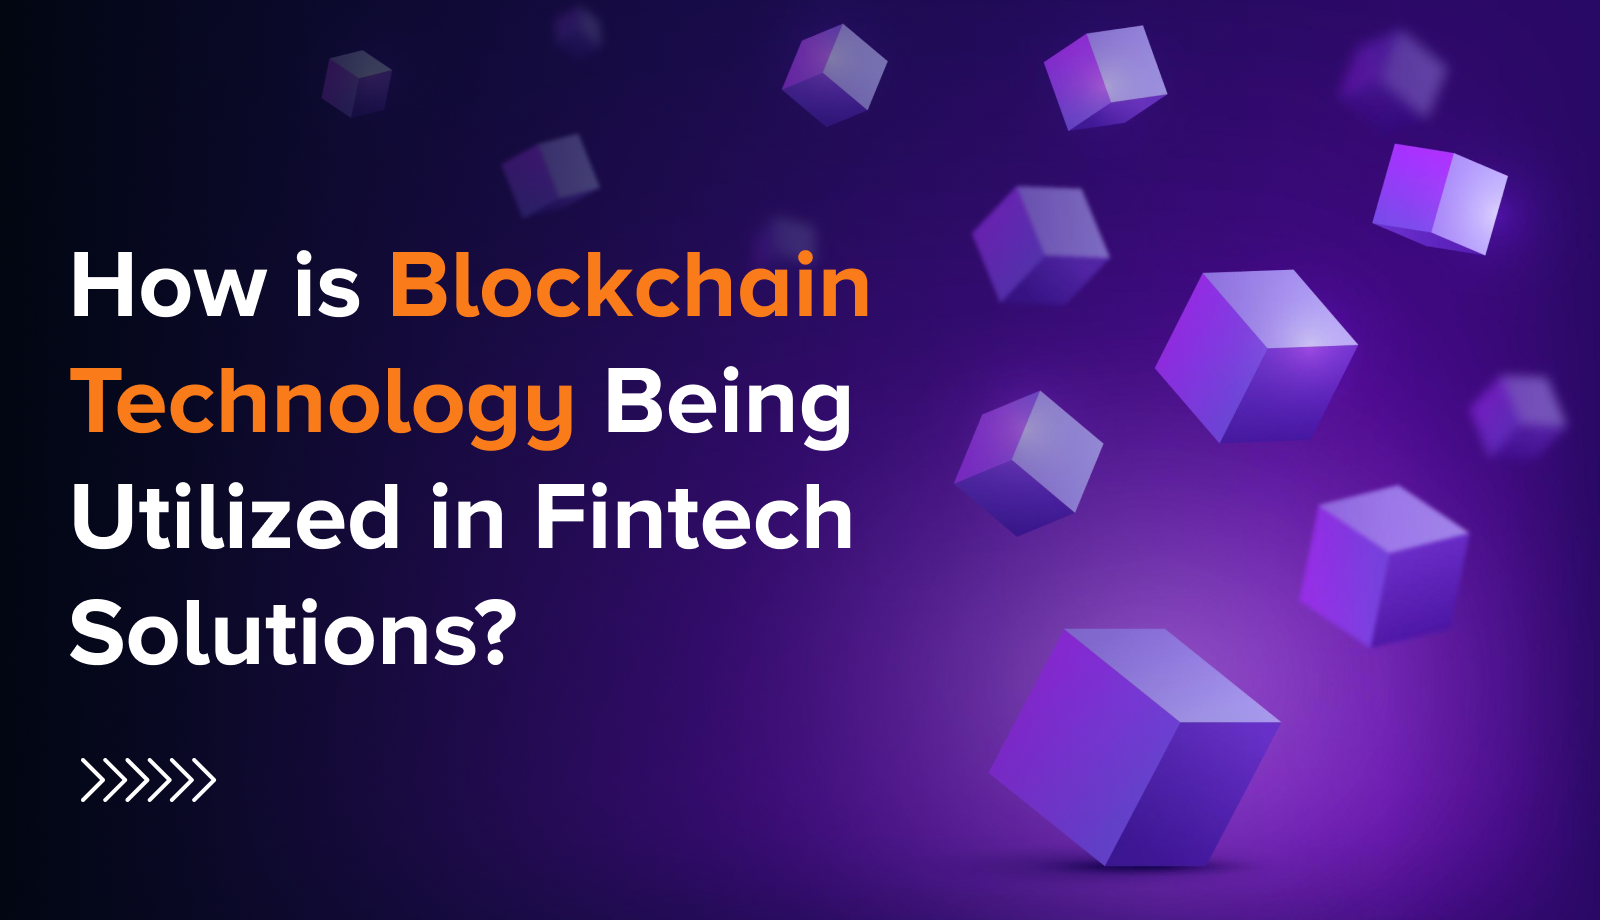 oy

How is Blockchain
Technology Being
Utilized in Fintech
Solutions?

0000028 - oy

How is Blockchain
Technology Being
Utilized in Fintech
Solutions?

0000028